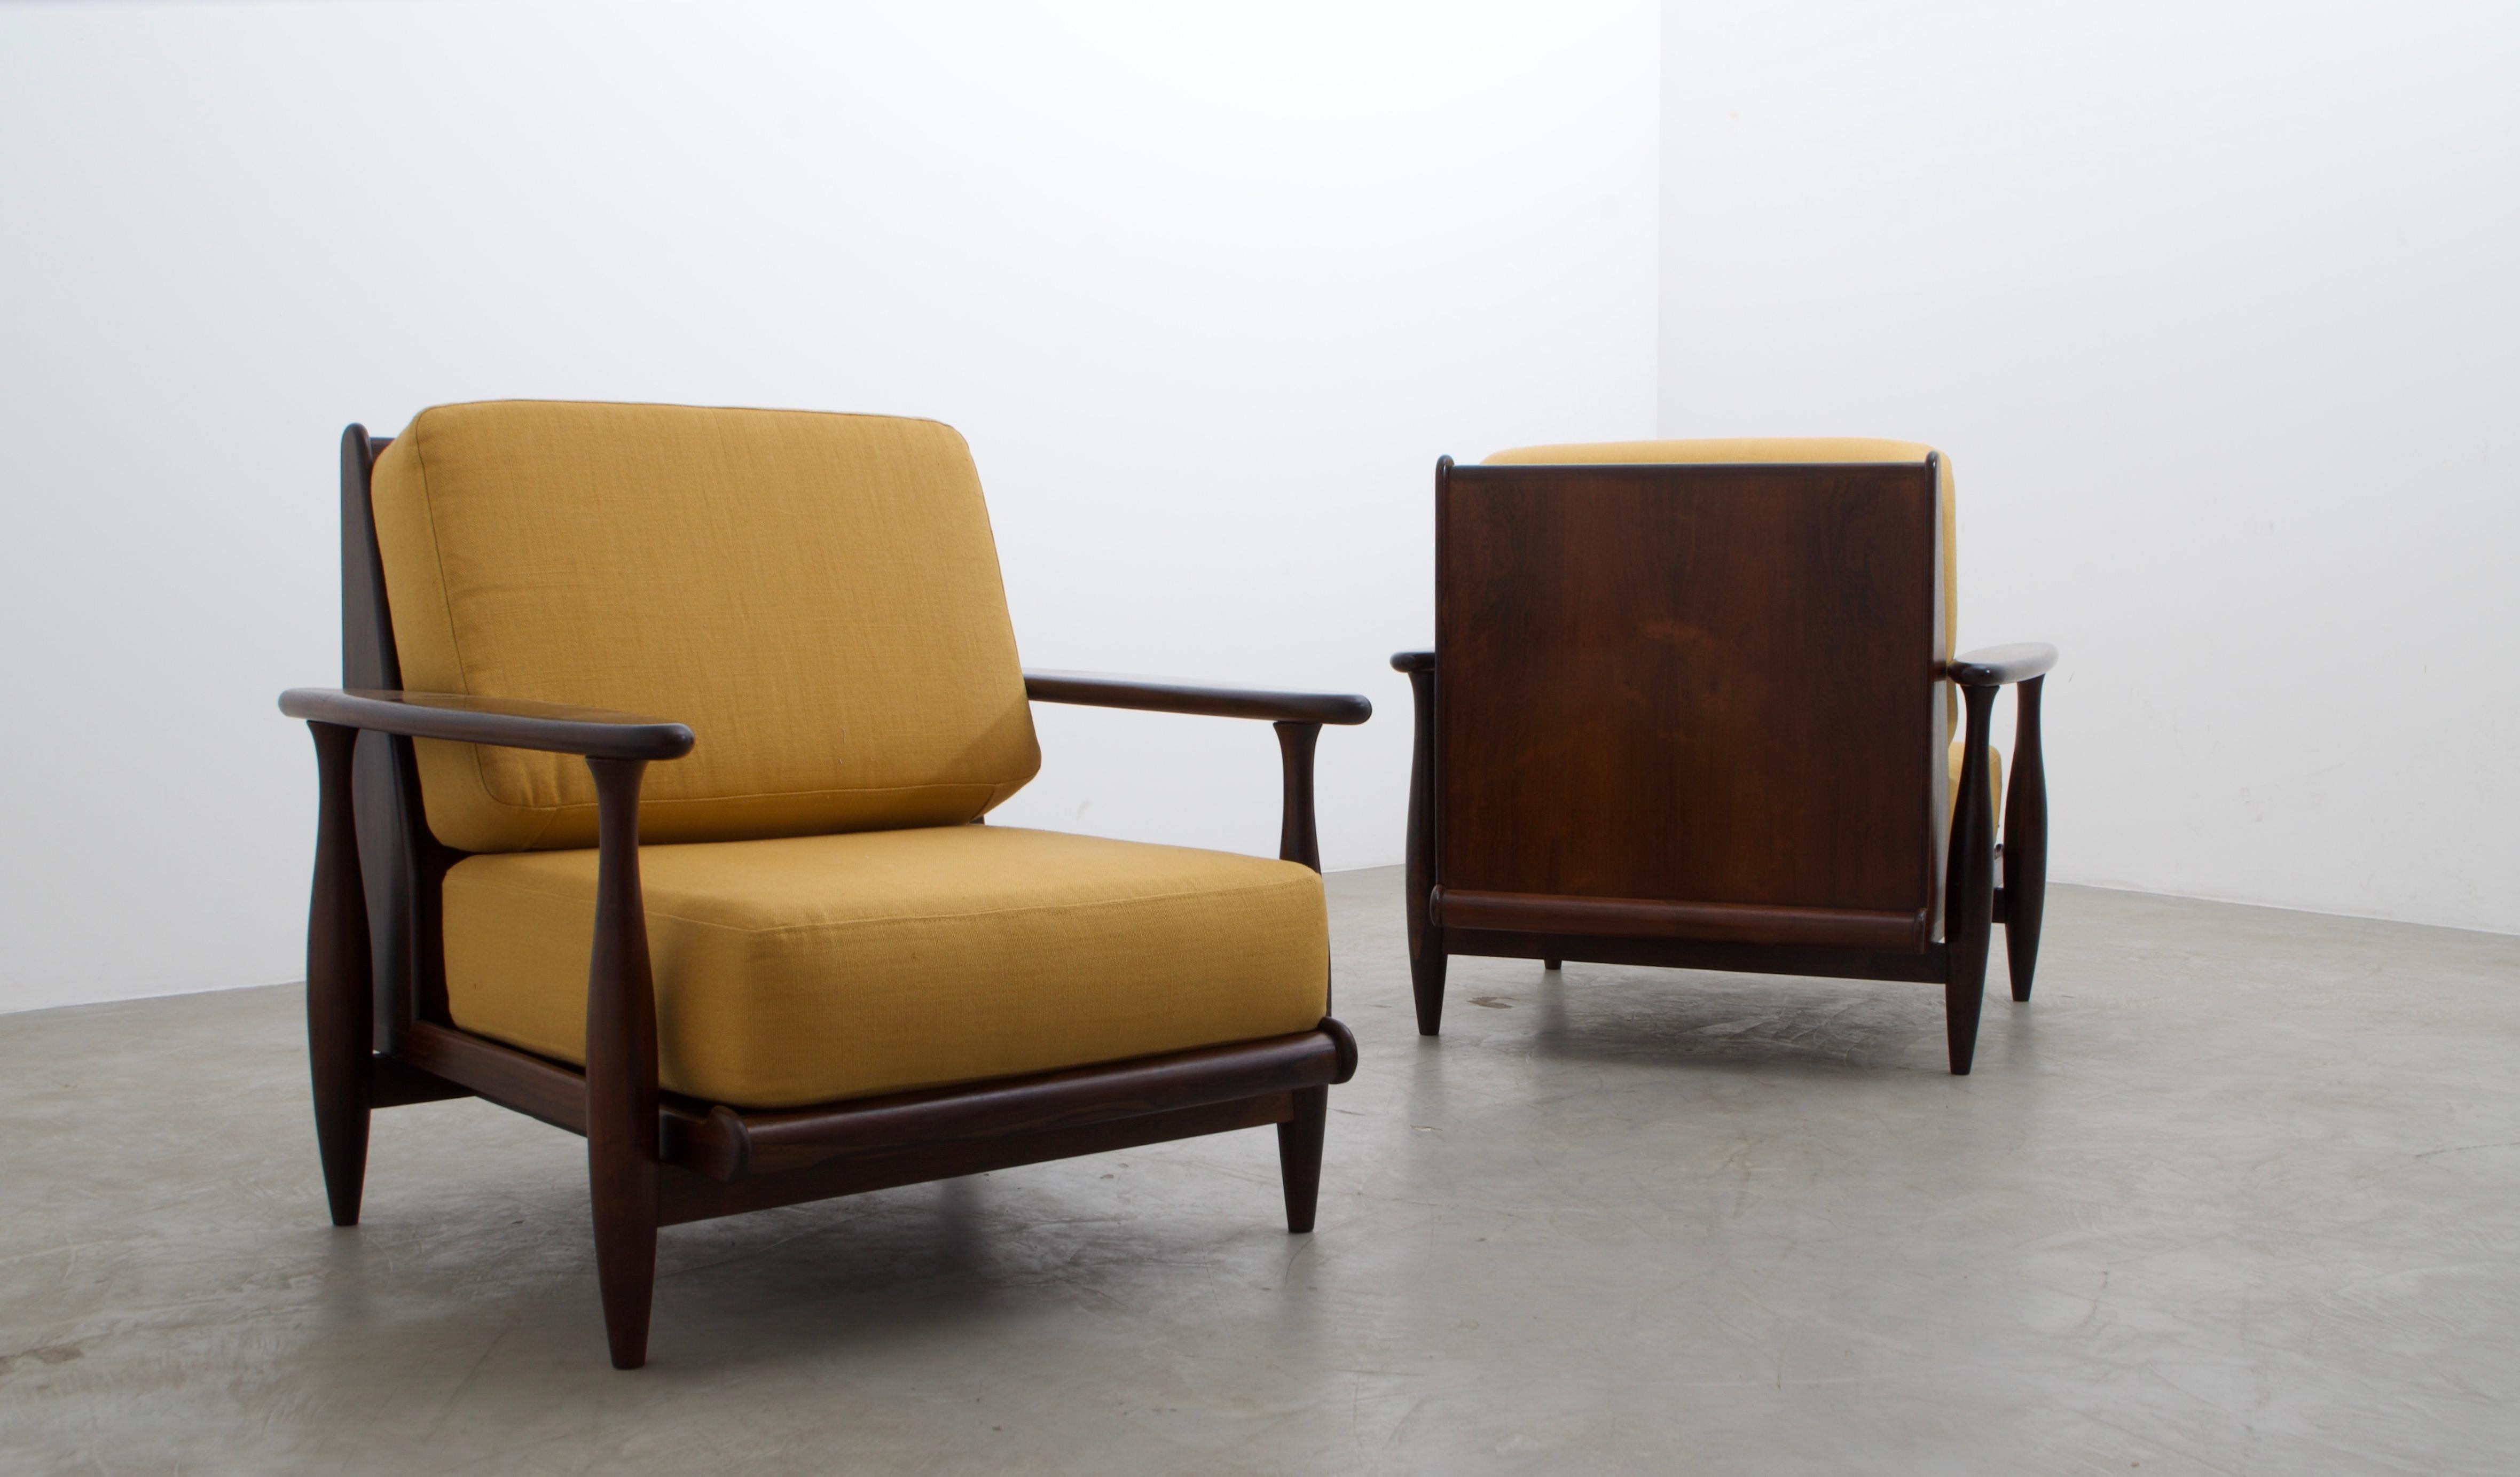 Mid-Century Modern Pair of Lounge Chairs by Liceu de Artes e Ofícios, 1960's, Brazilian Mid-Century For Sale